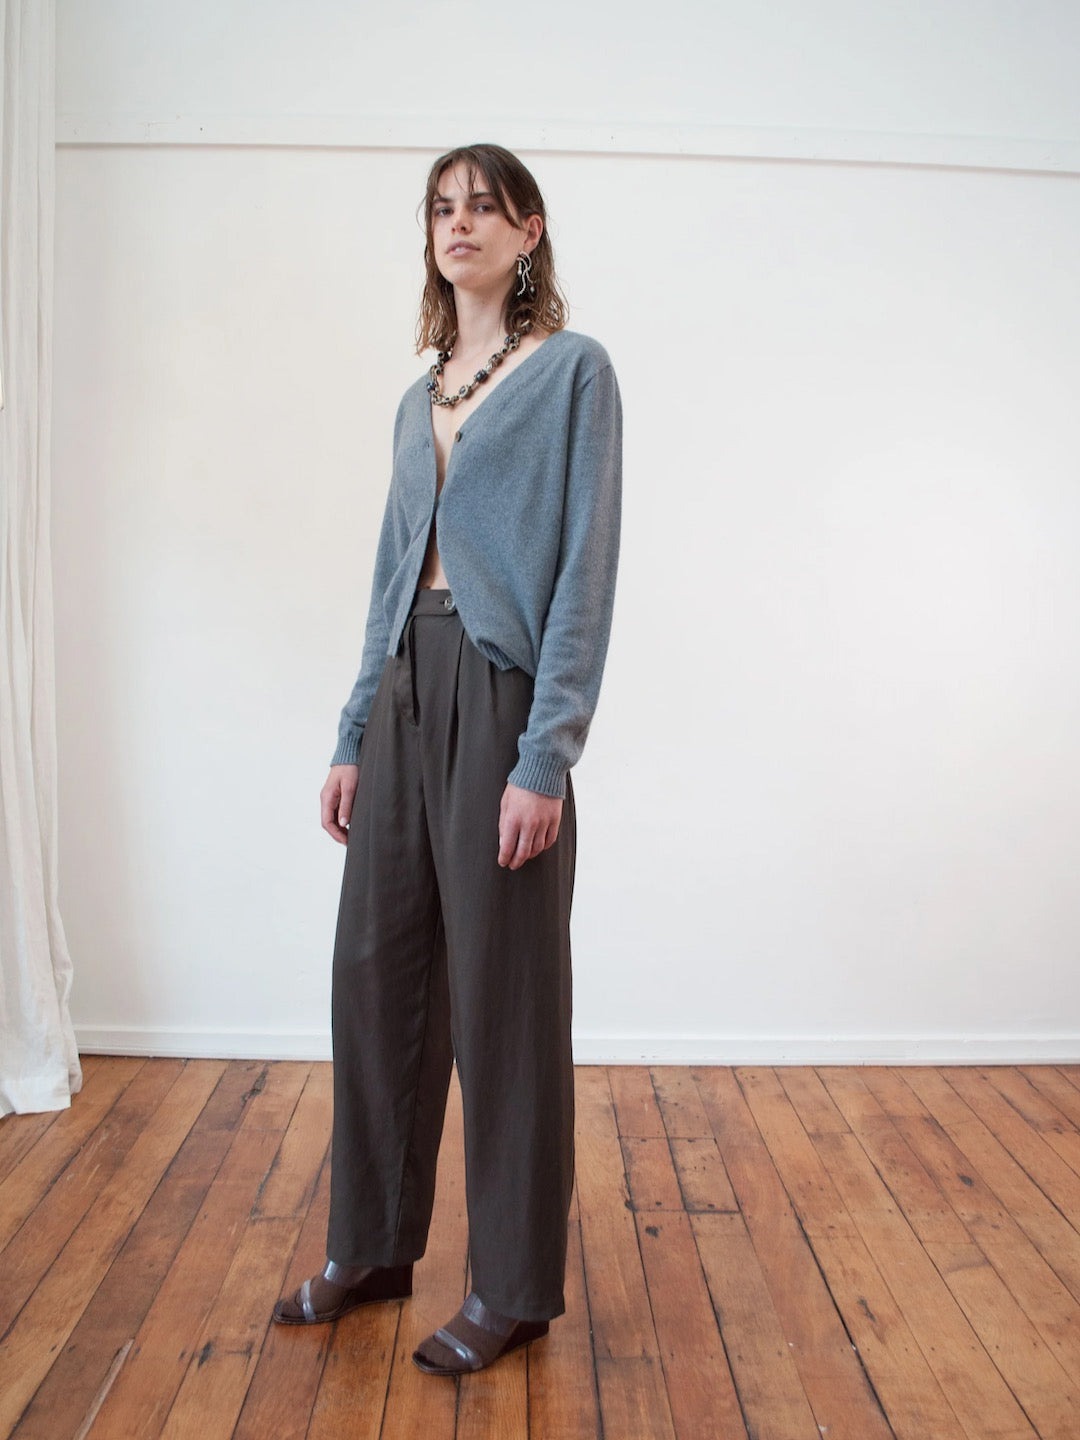 A woman is standing in a room wearing wide leg pants and an OVNA OVICH Kom Cardigan – Stone.